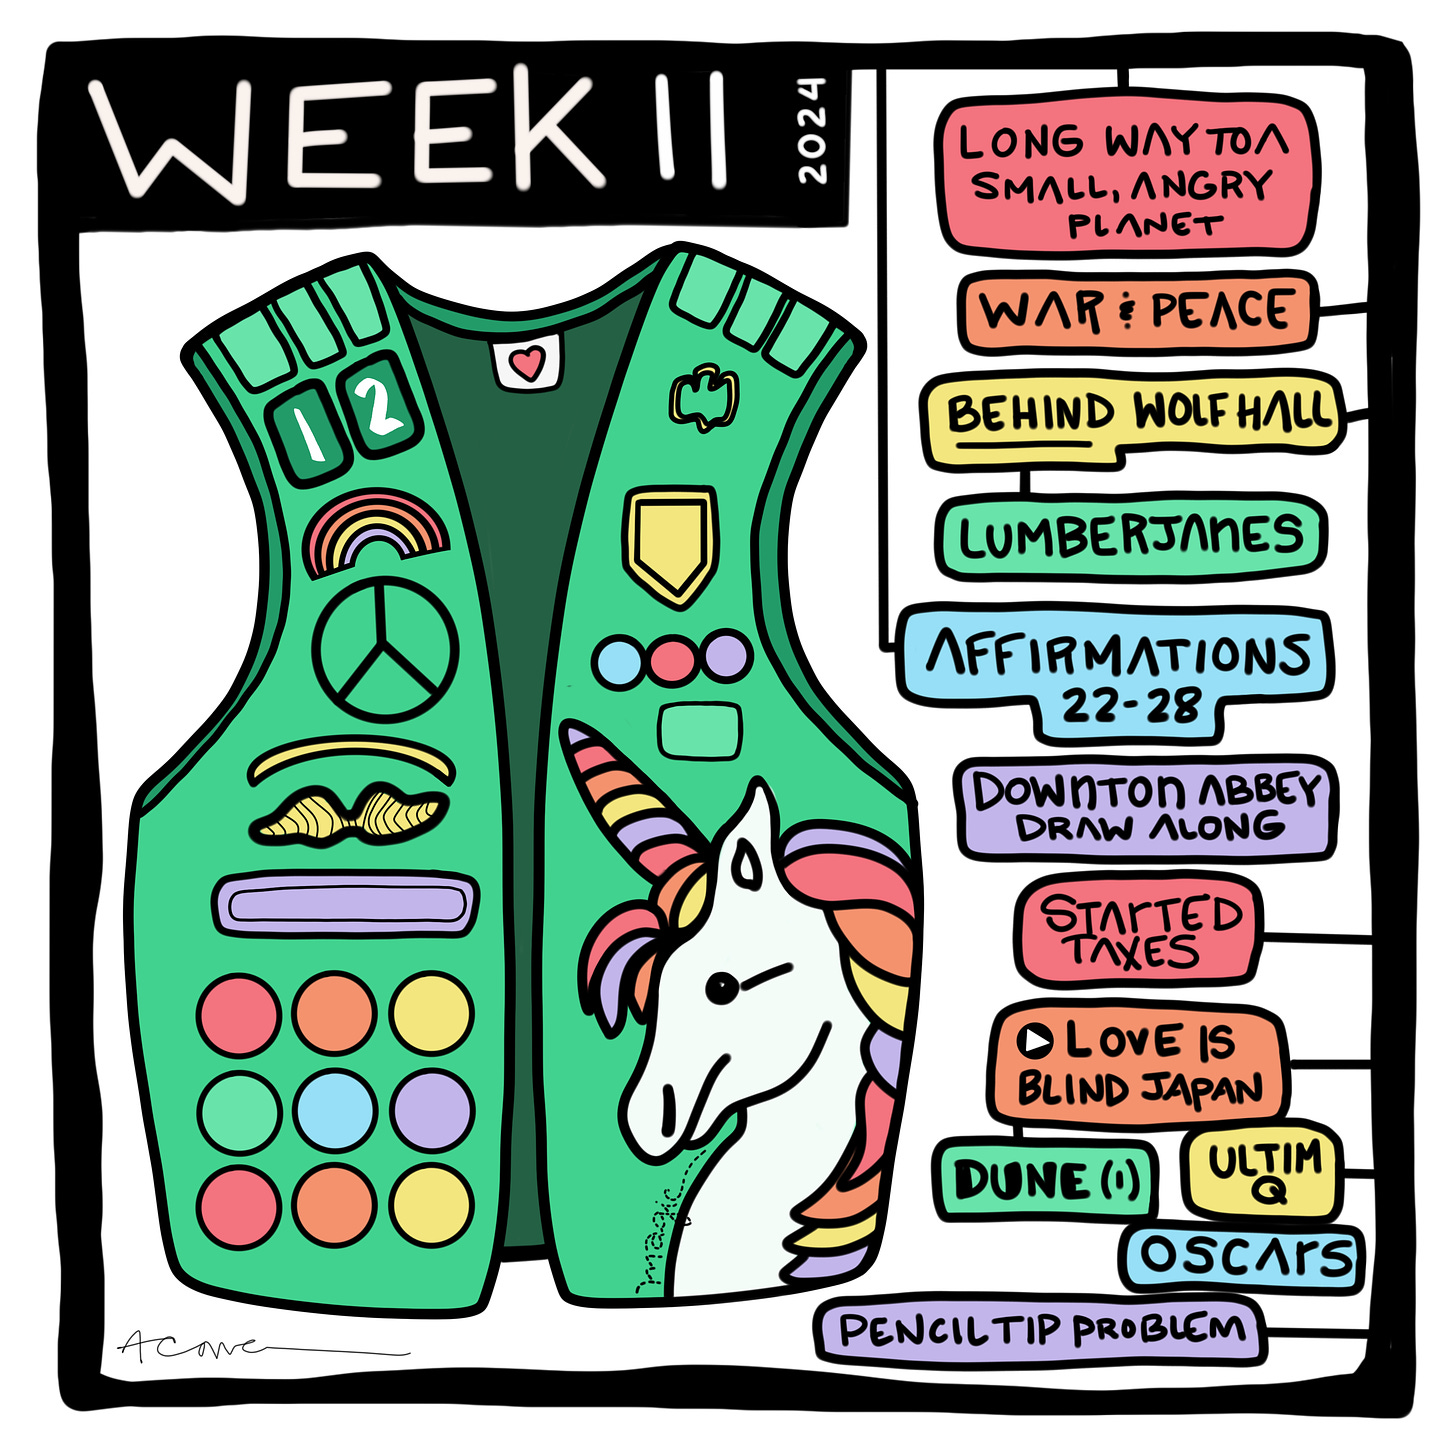 Weekly diary list comic for week 11 - A Cowen 2024 - feature image is a green vest with badges, like scouts